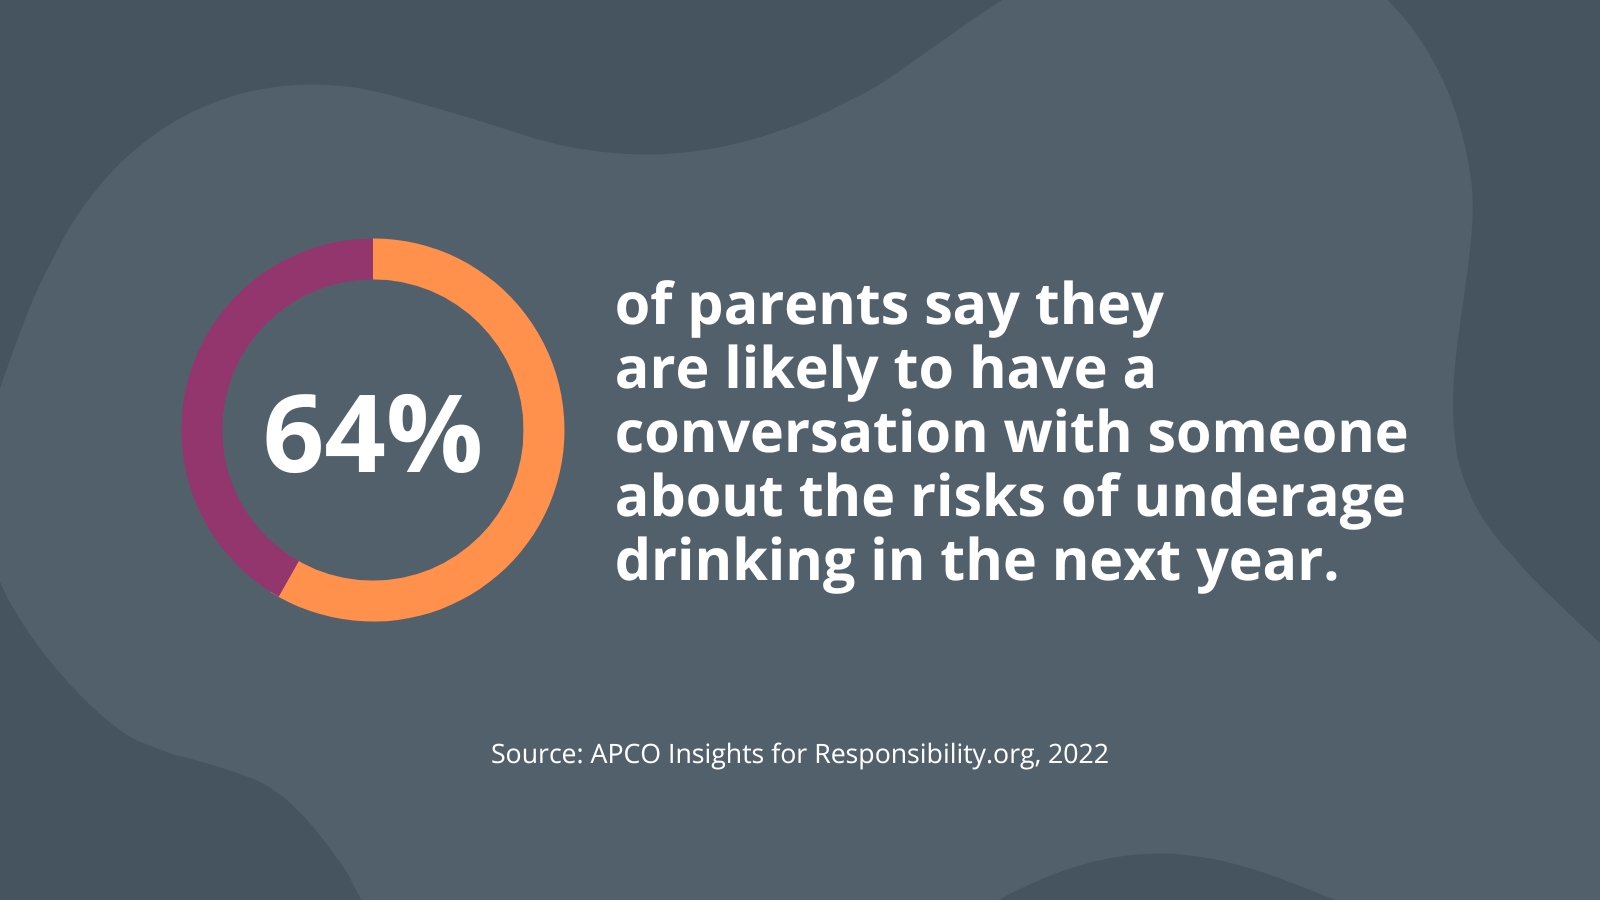 64% of parents say they
are likely to have a conversation with someone about the risks of underage drinking in the next year.